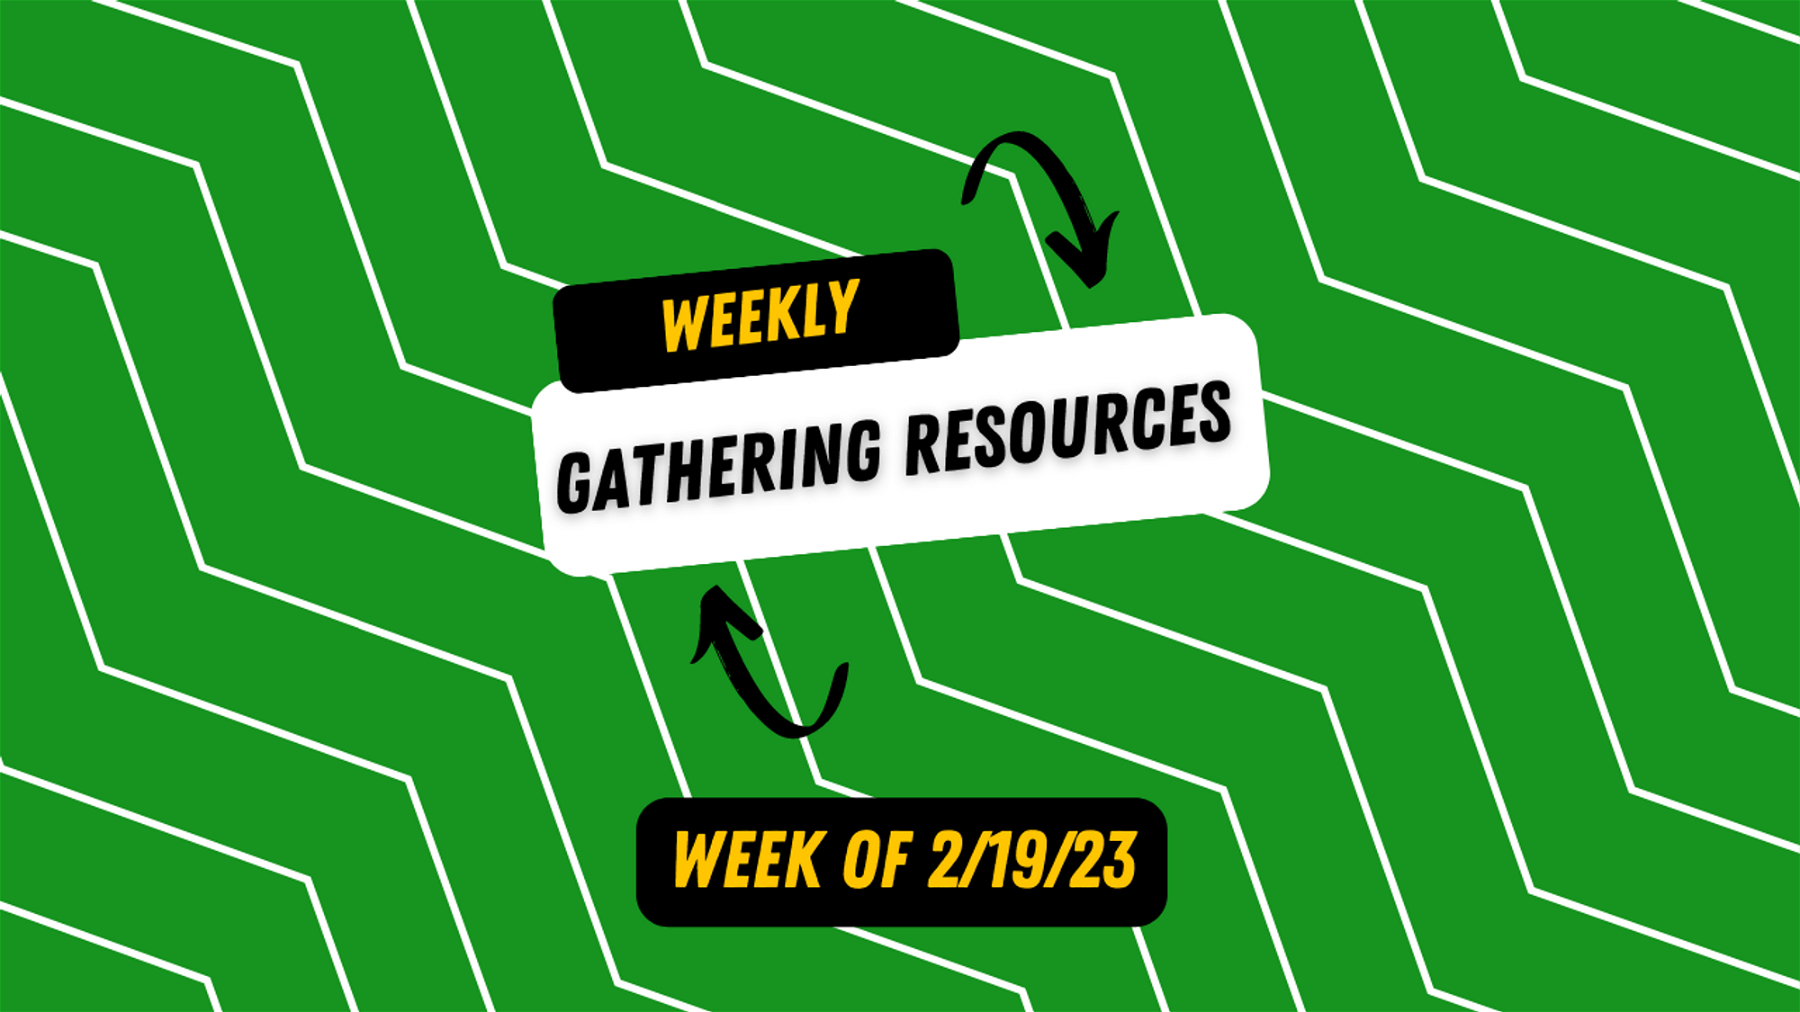 Weekly Gathering Resources for 2/19/23